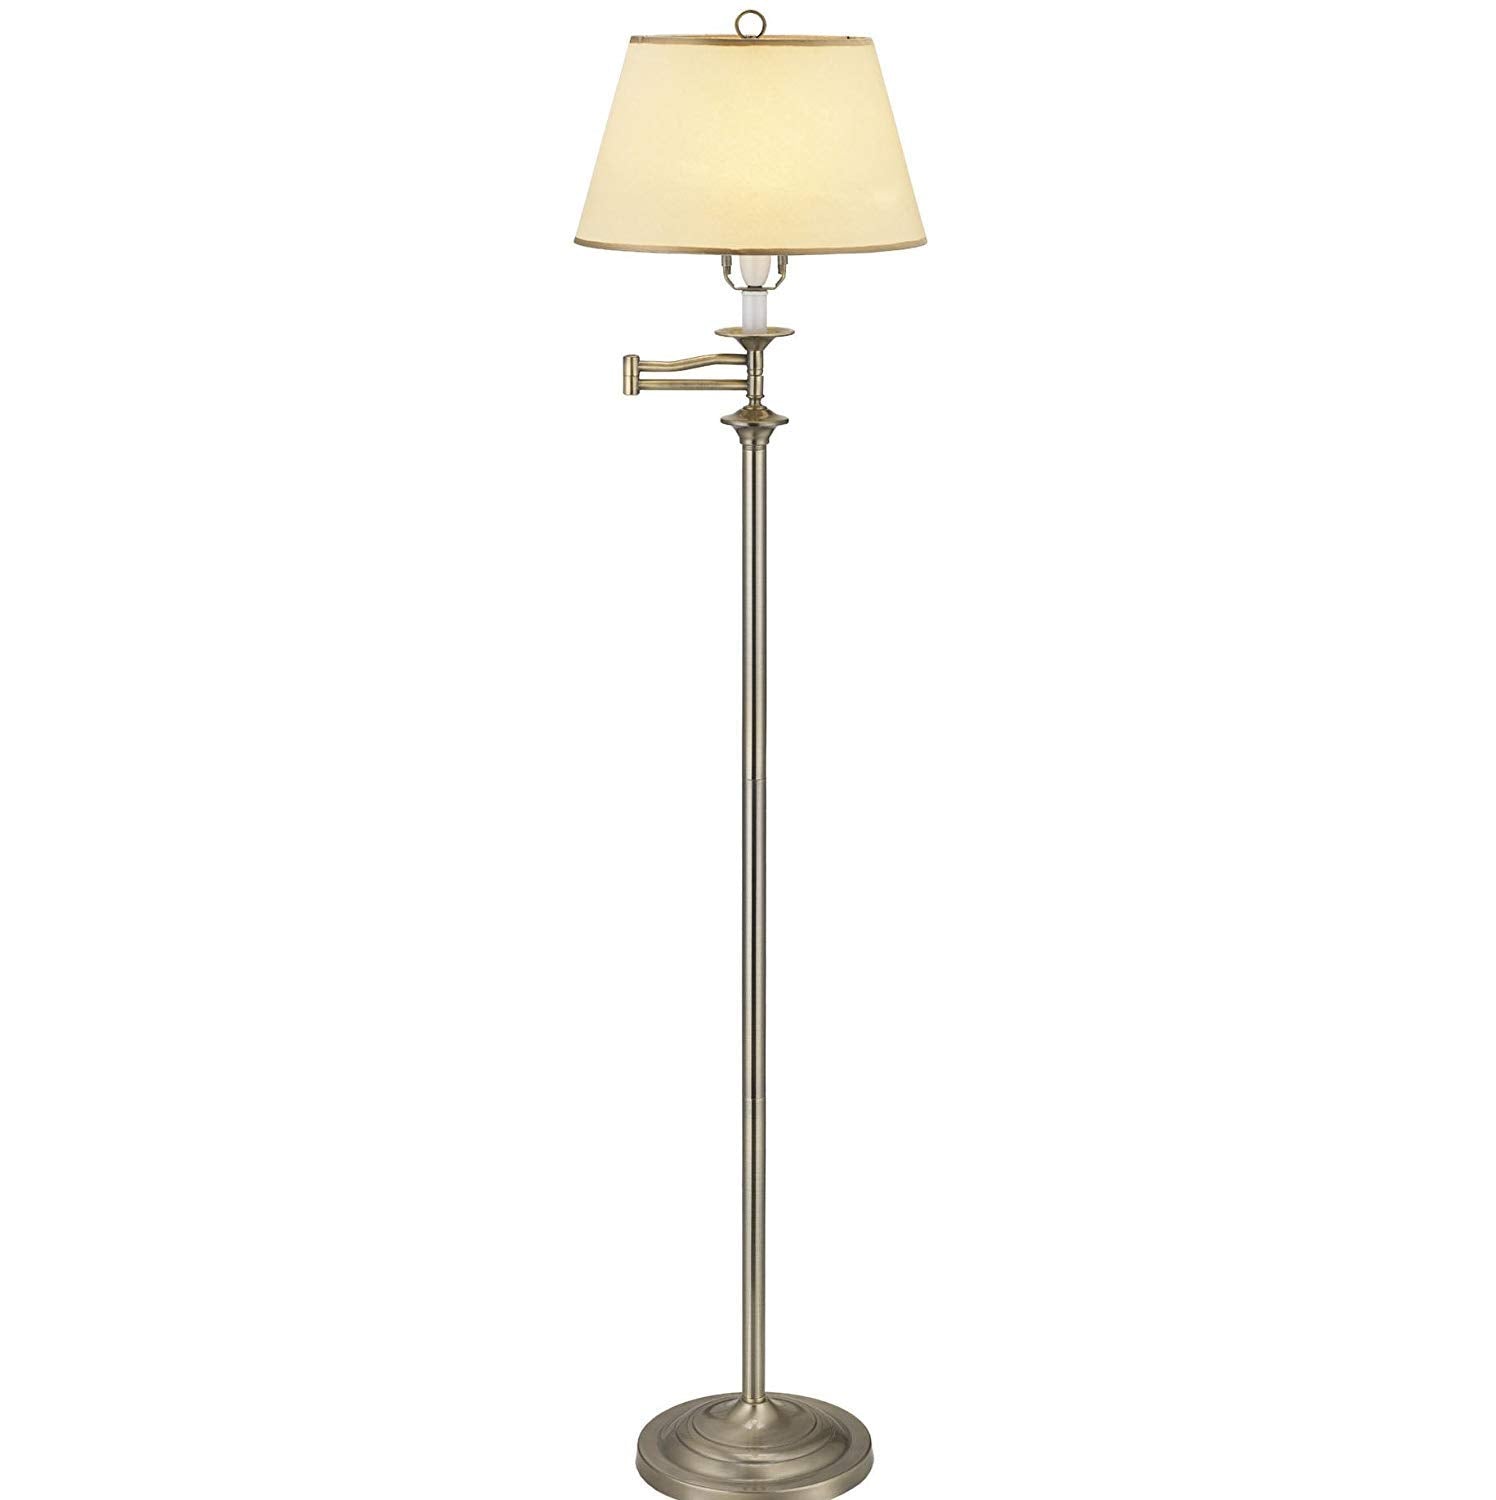 Belfry Swing Arm Floor Lamp, Antique Brass finish supplied complete with Parchment shade